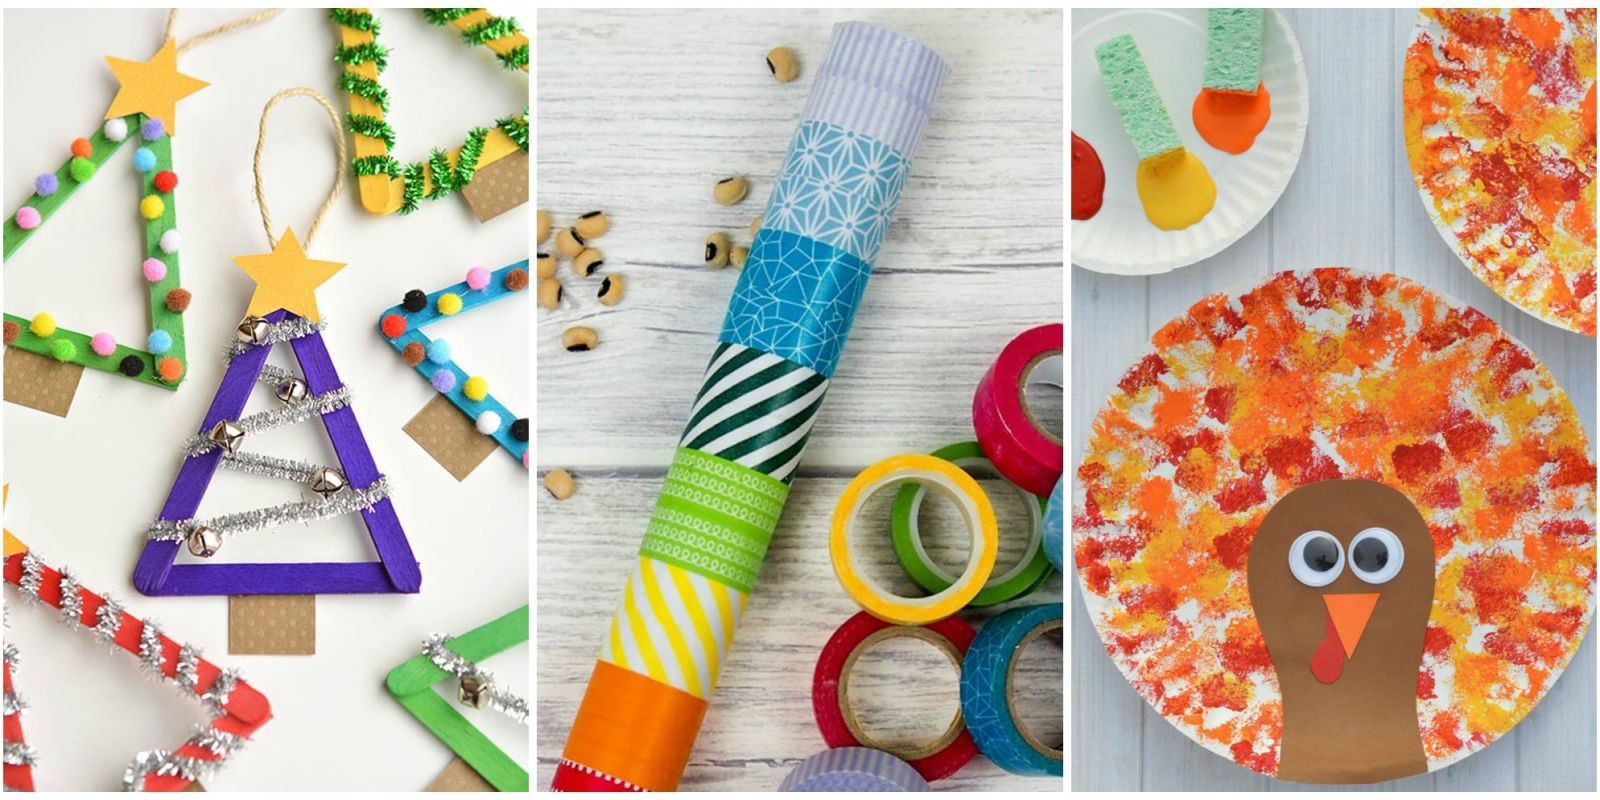 10 Easy Crafts For Toddlers -Arts and Crafts Ideas for Toddlers Age 2-3